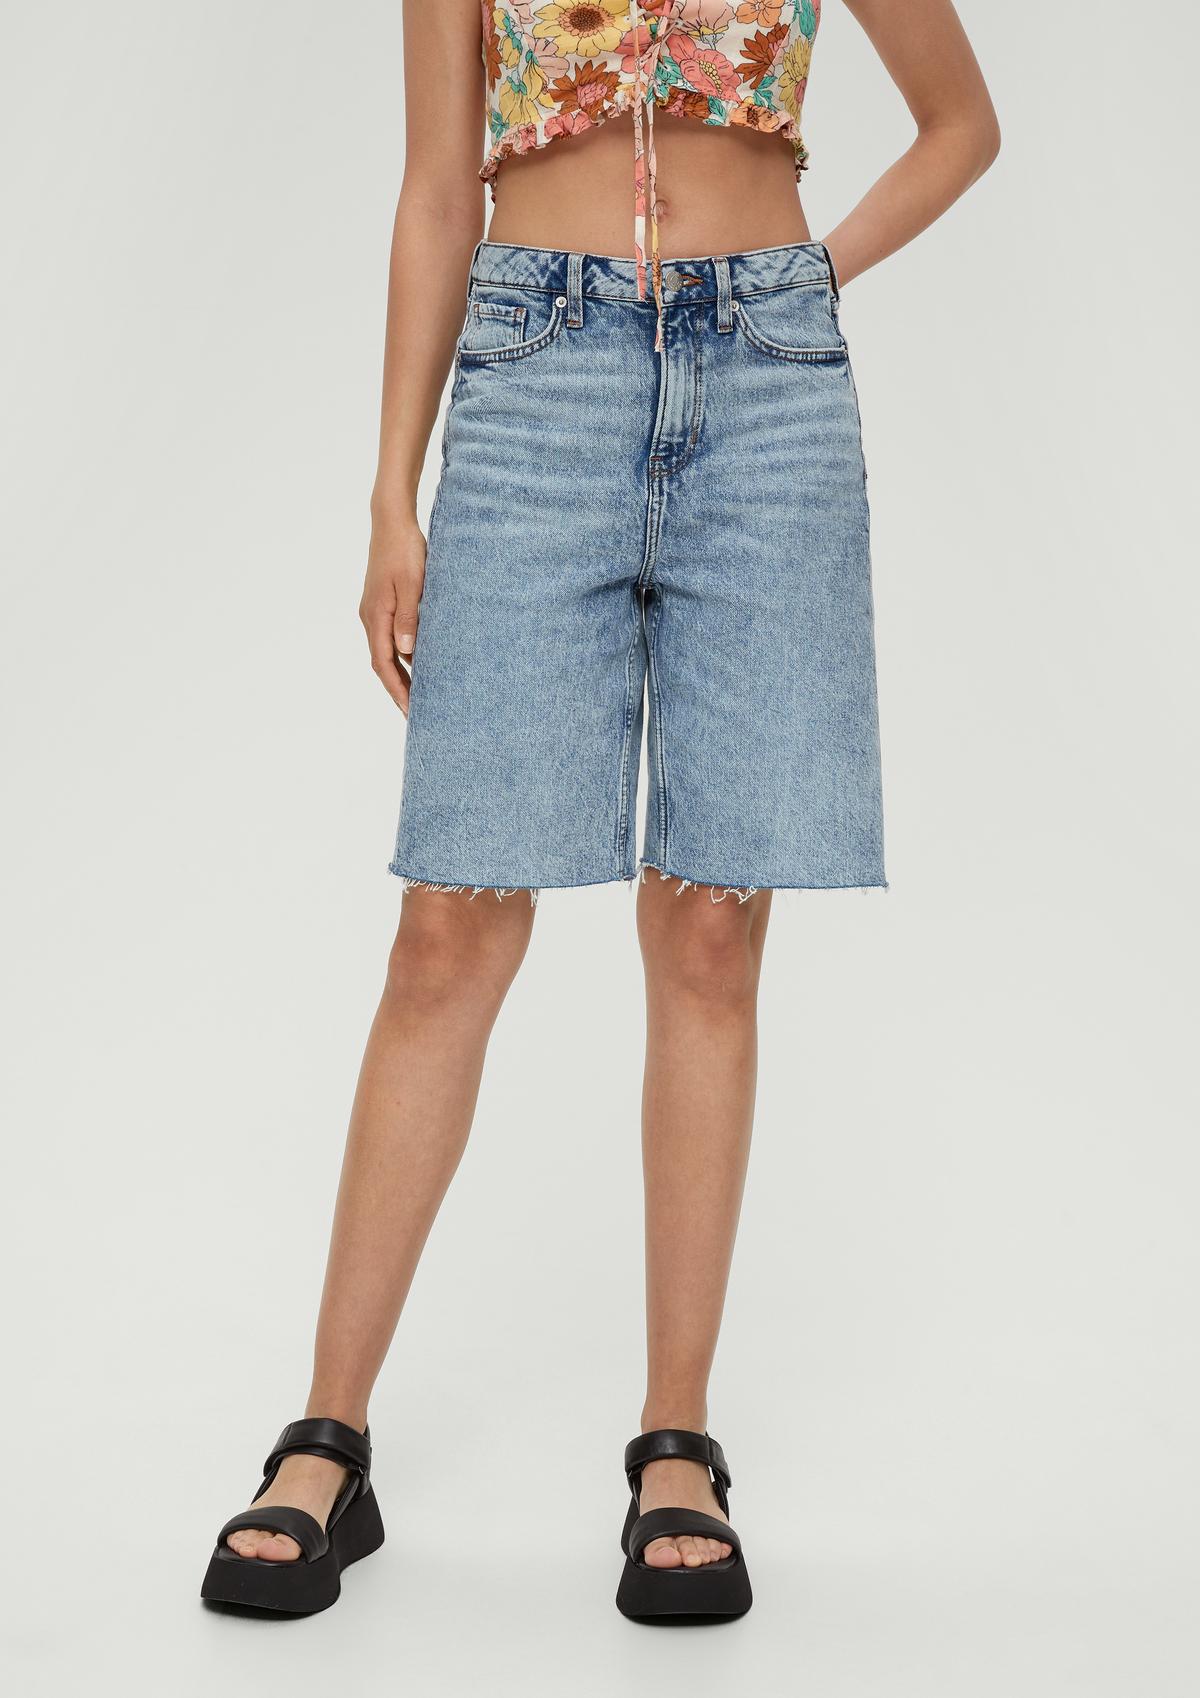 s.Oliver Mom fit: denim Bermuda shorts with a high-rise waist